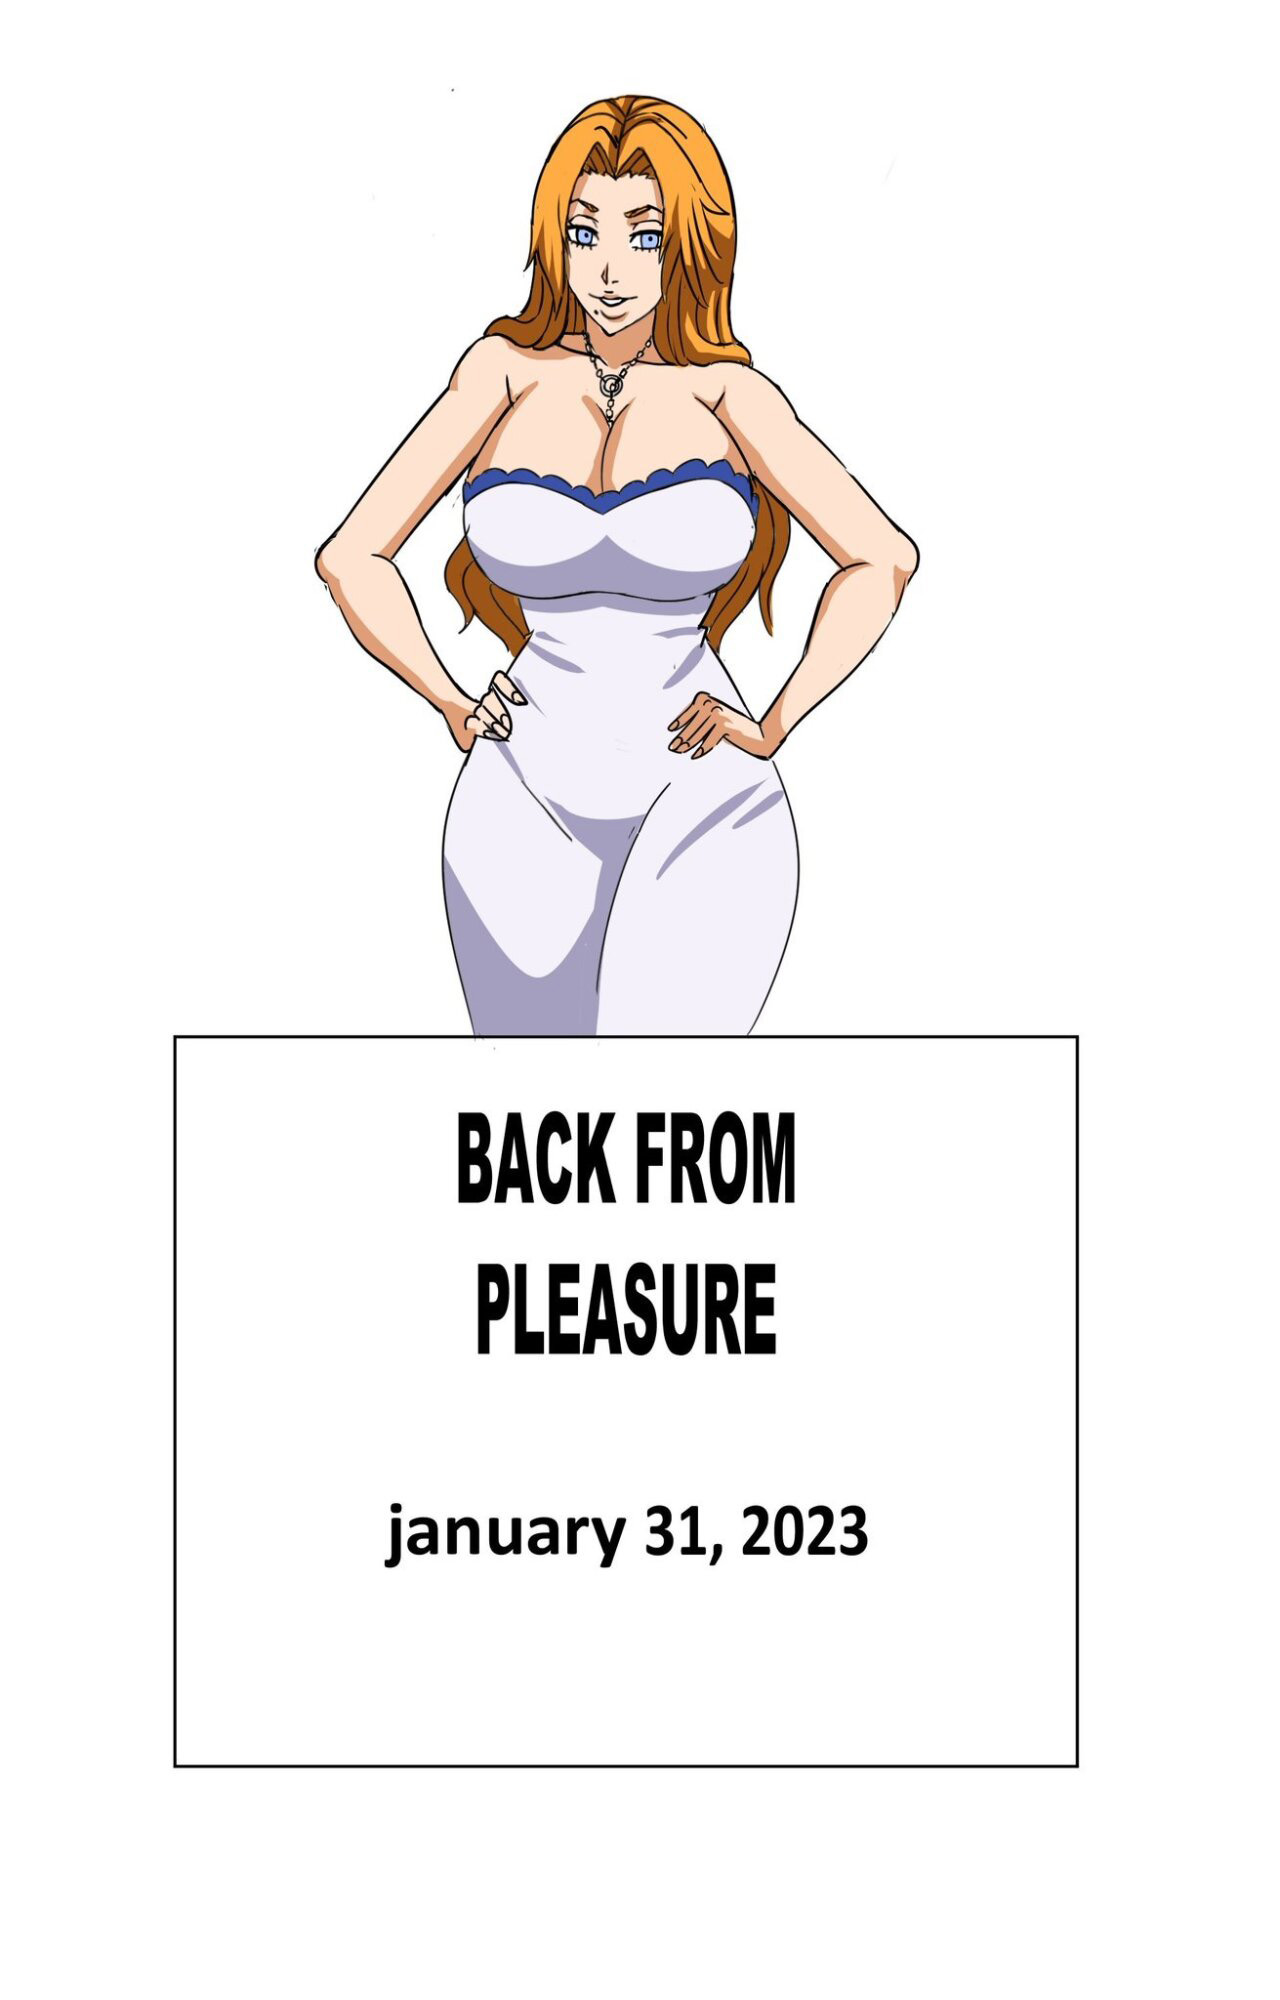 Back from PLEASURE